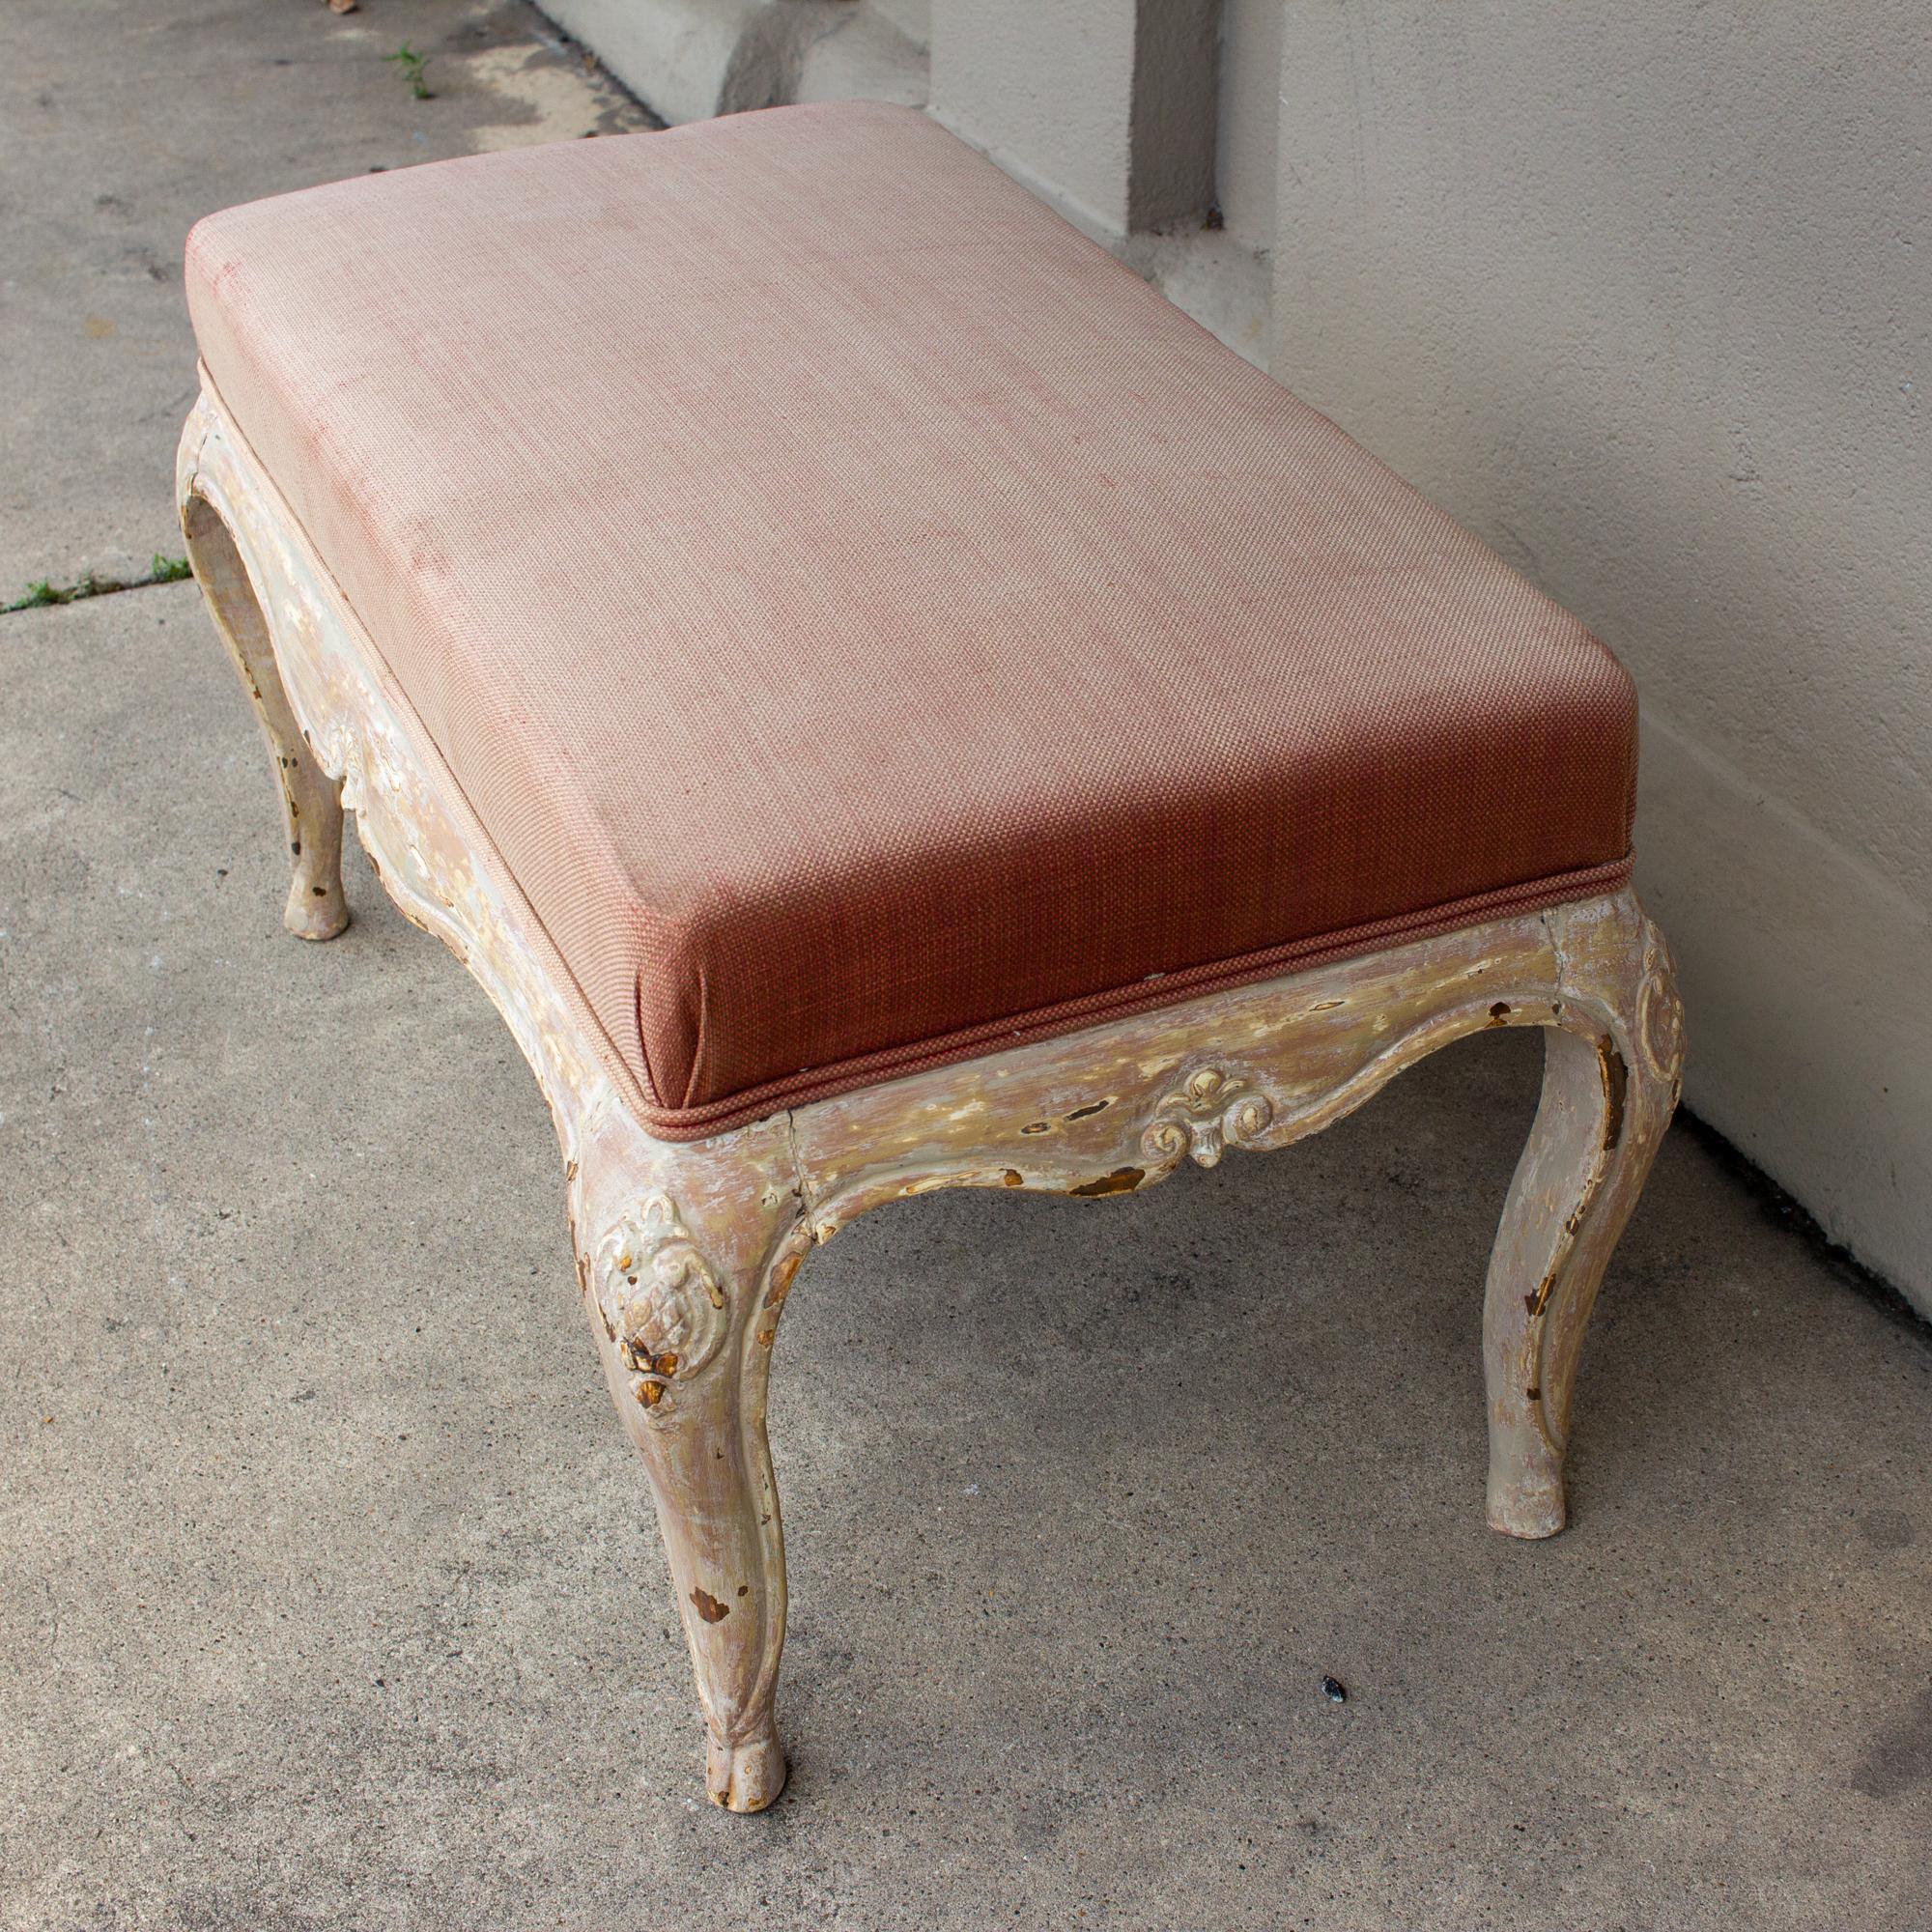 Hand-Carved Antique French Carved Bench with Distressed Painted Finish, circa 1820